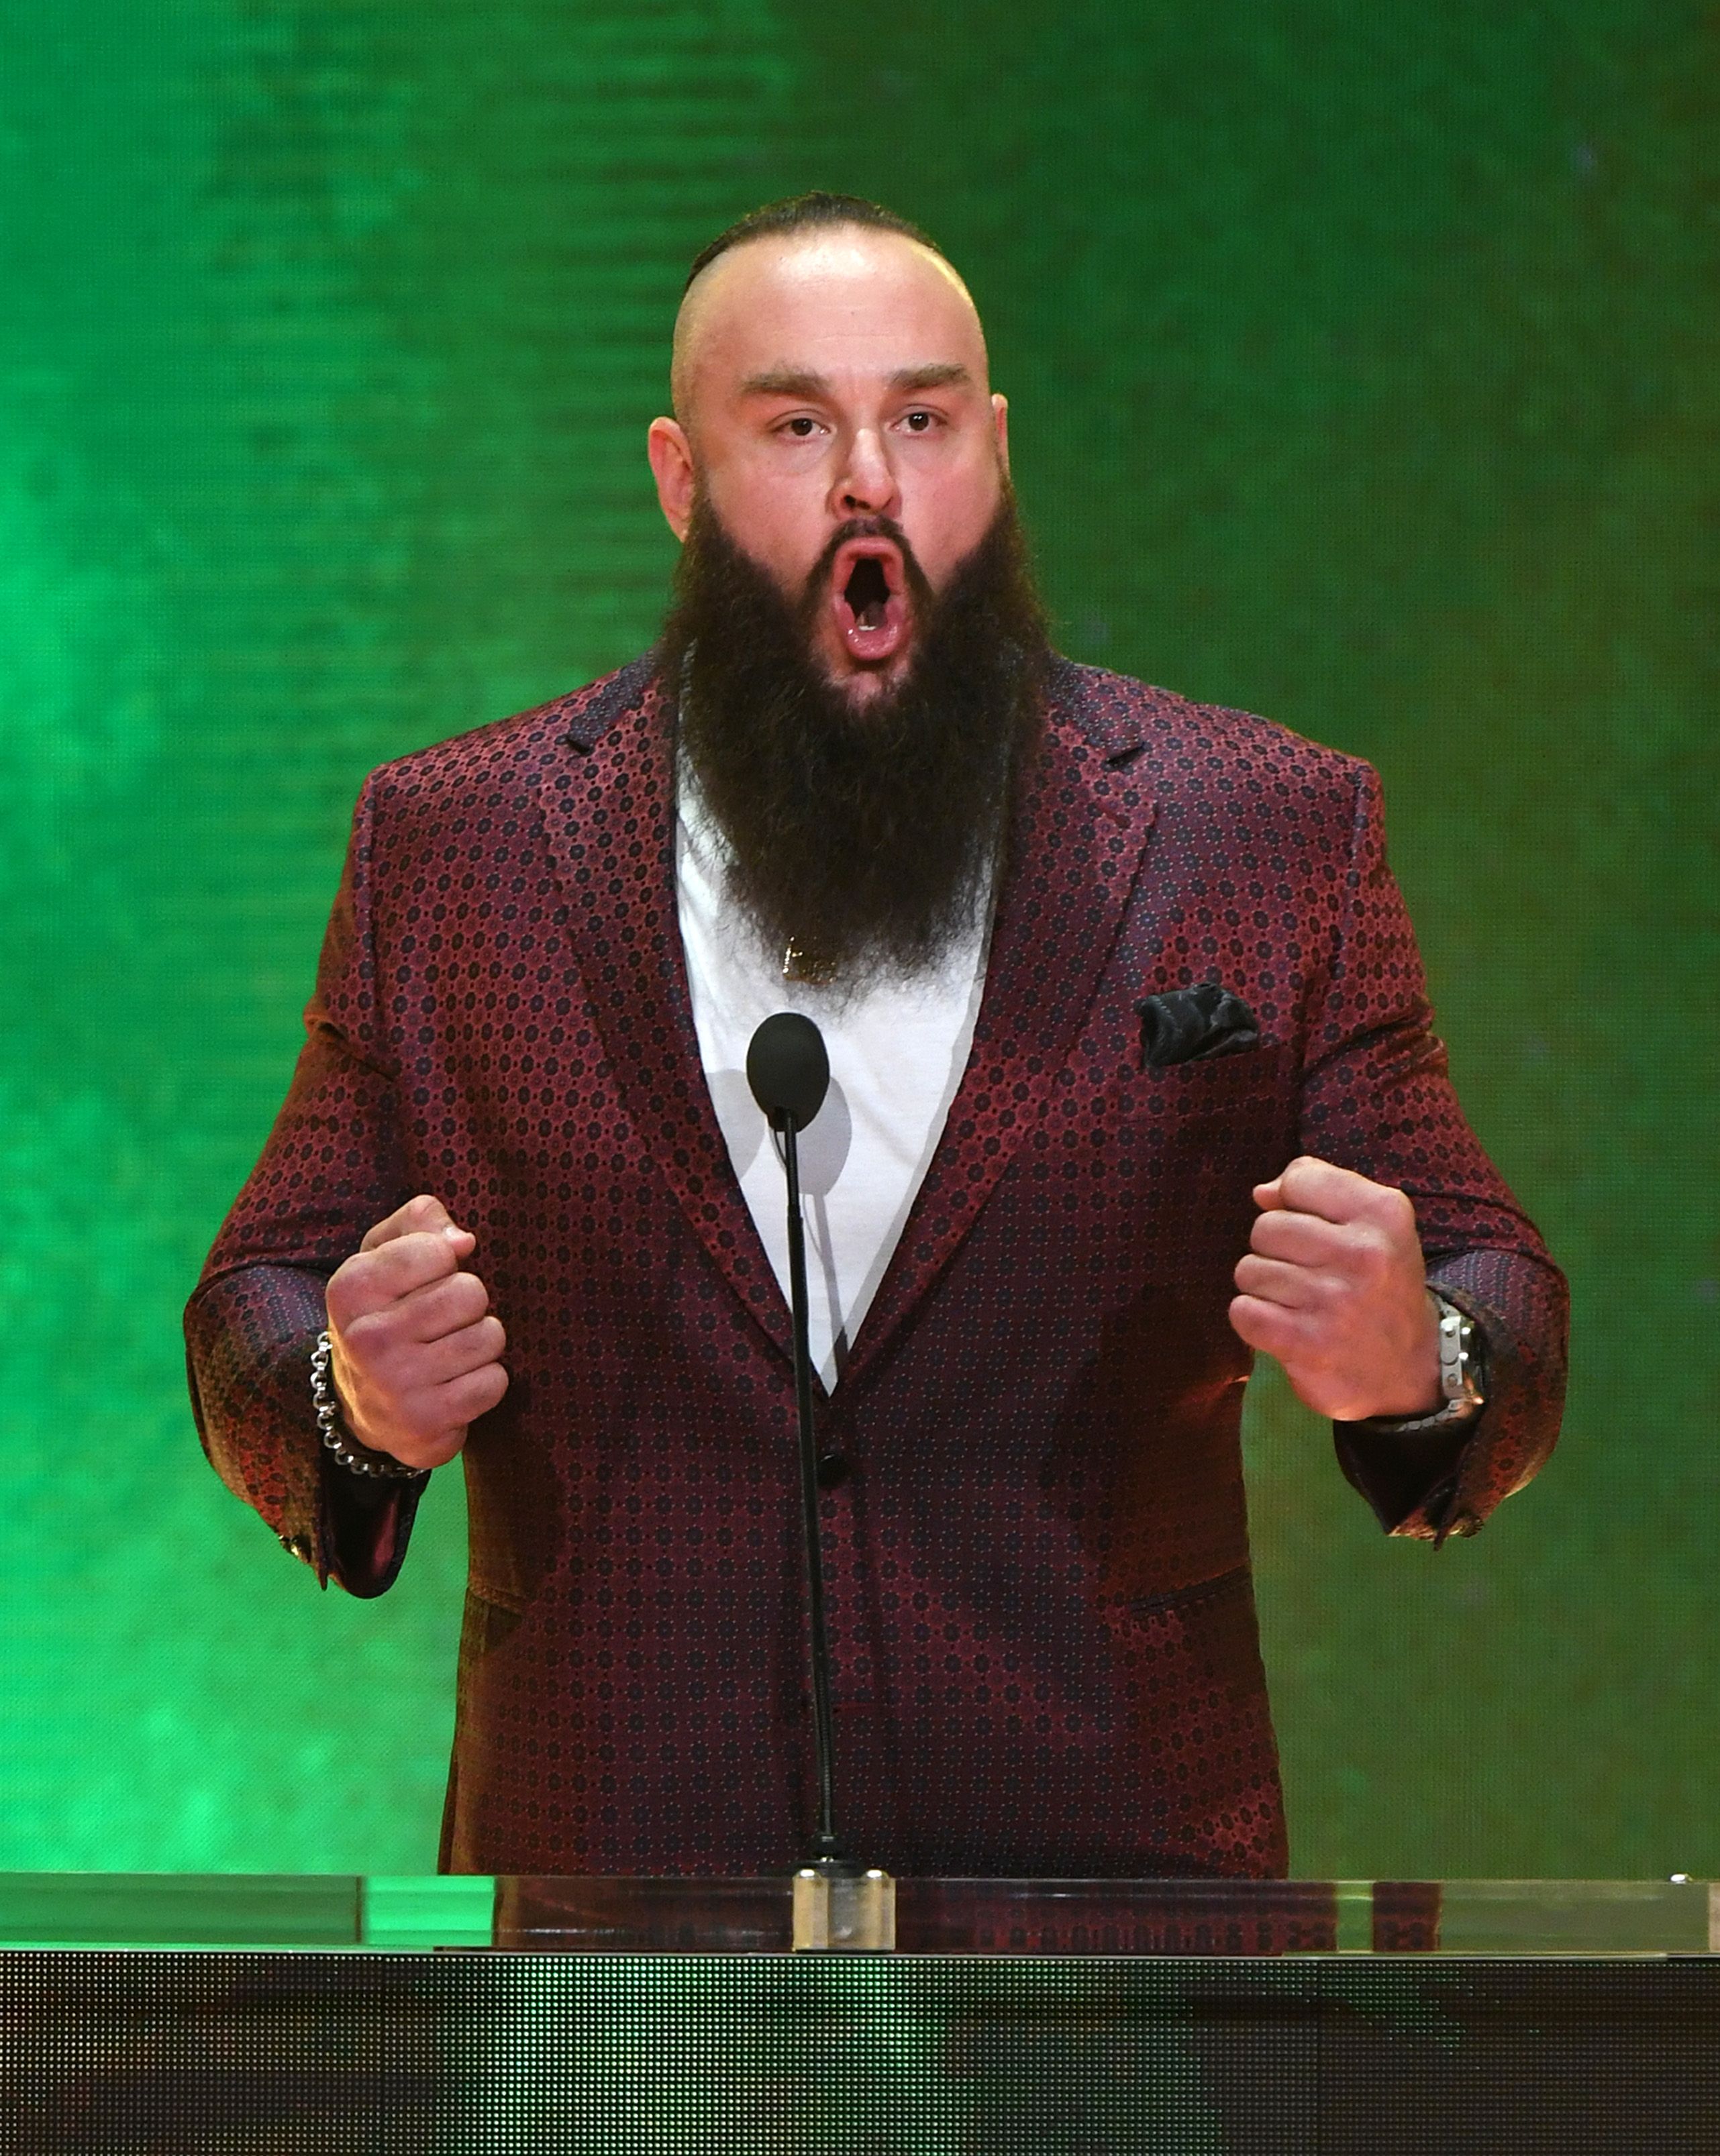 Braun Strowman at a WWE press conference